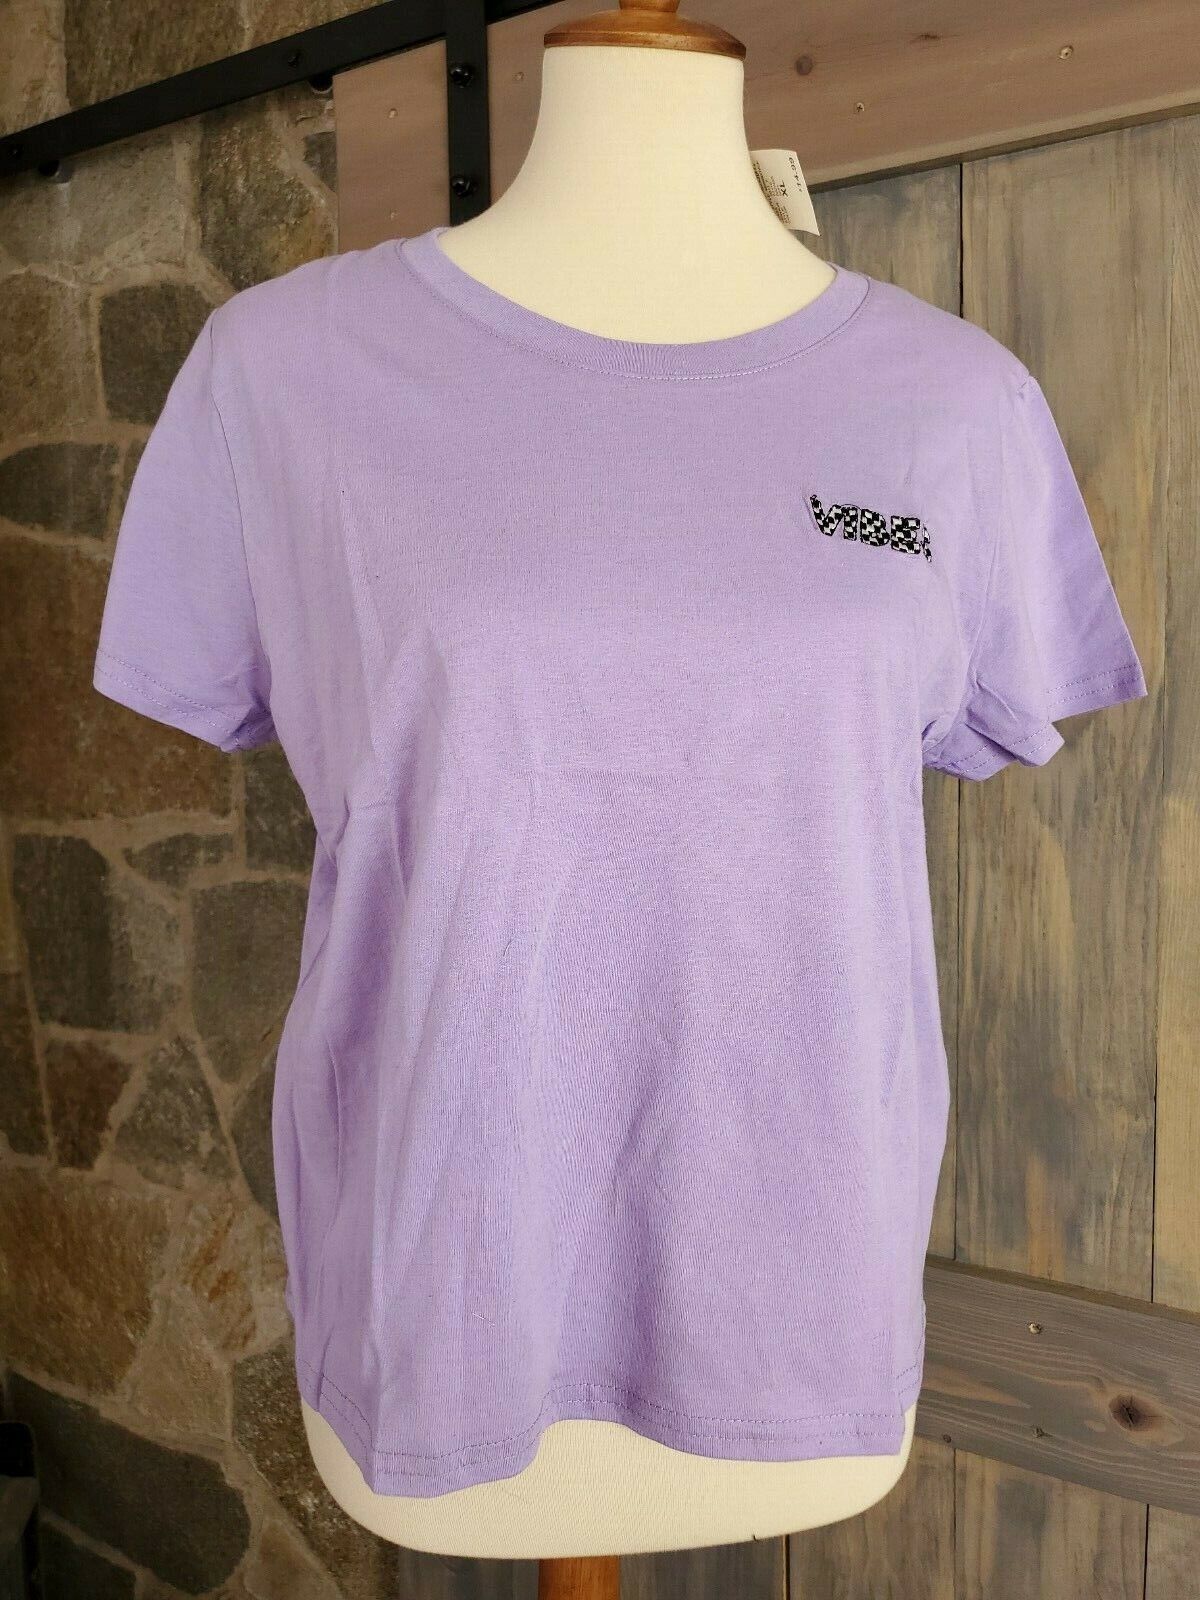 Primary image for Vibes Rue 21 Crop Top Lavender Purple T-Shirt Size XL